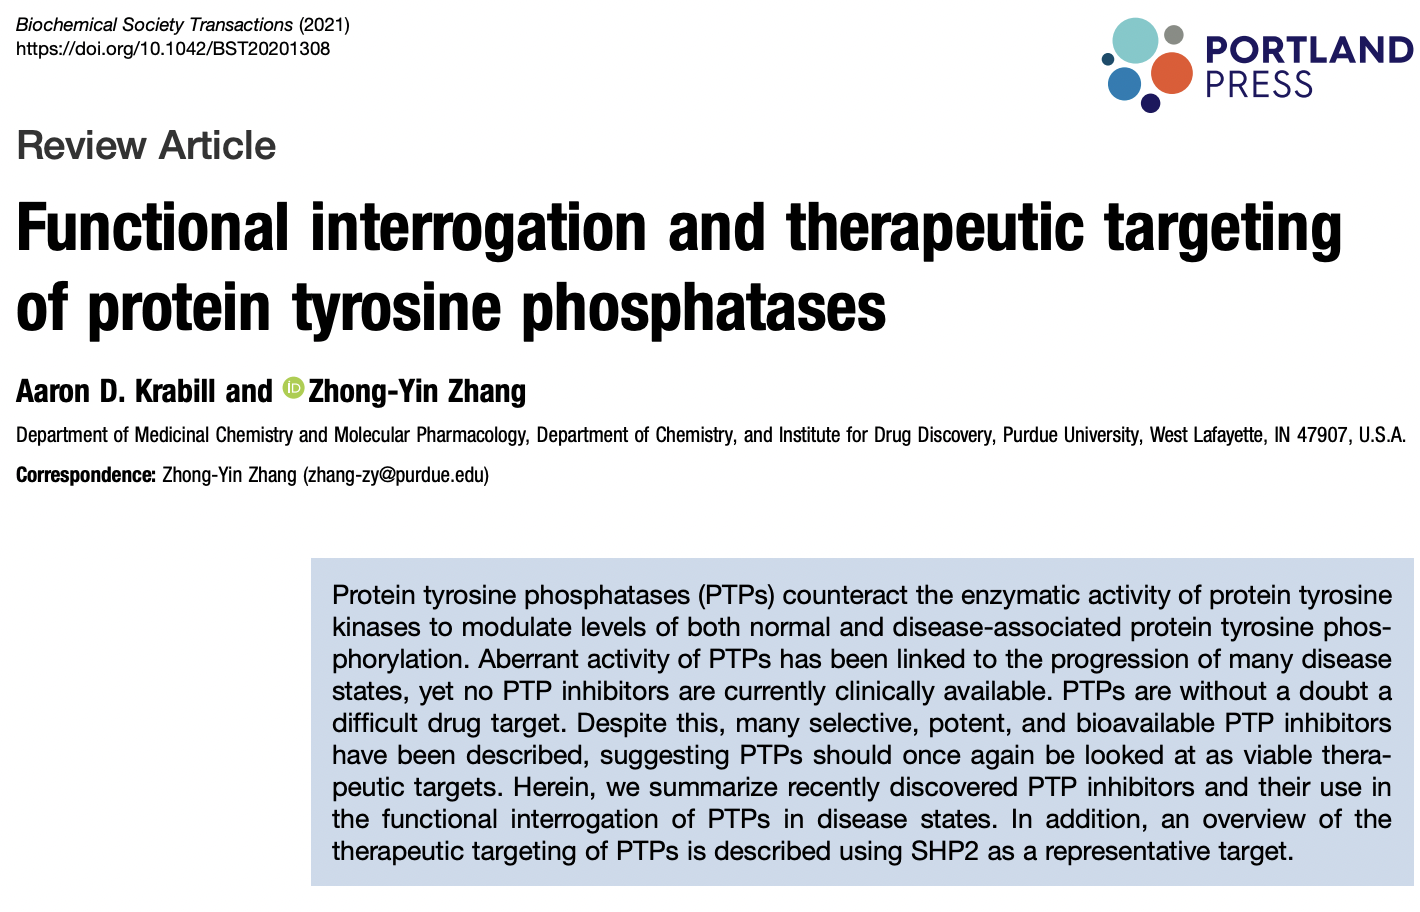 Functional interrogation and therapeutic targeting of protein tyrosine phosphatases